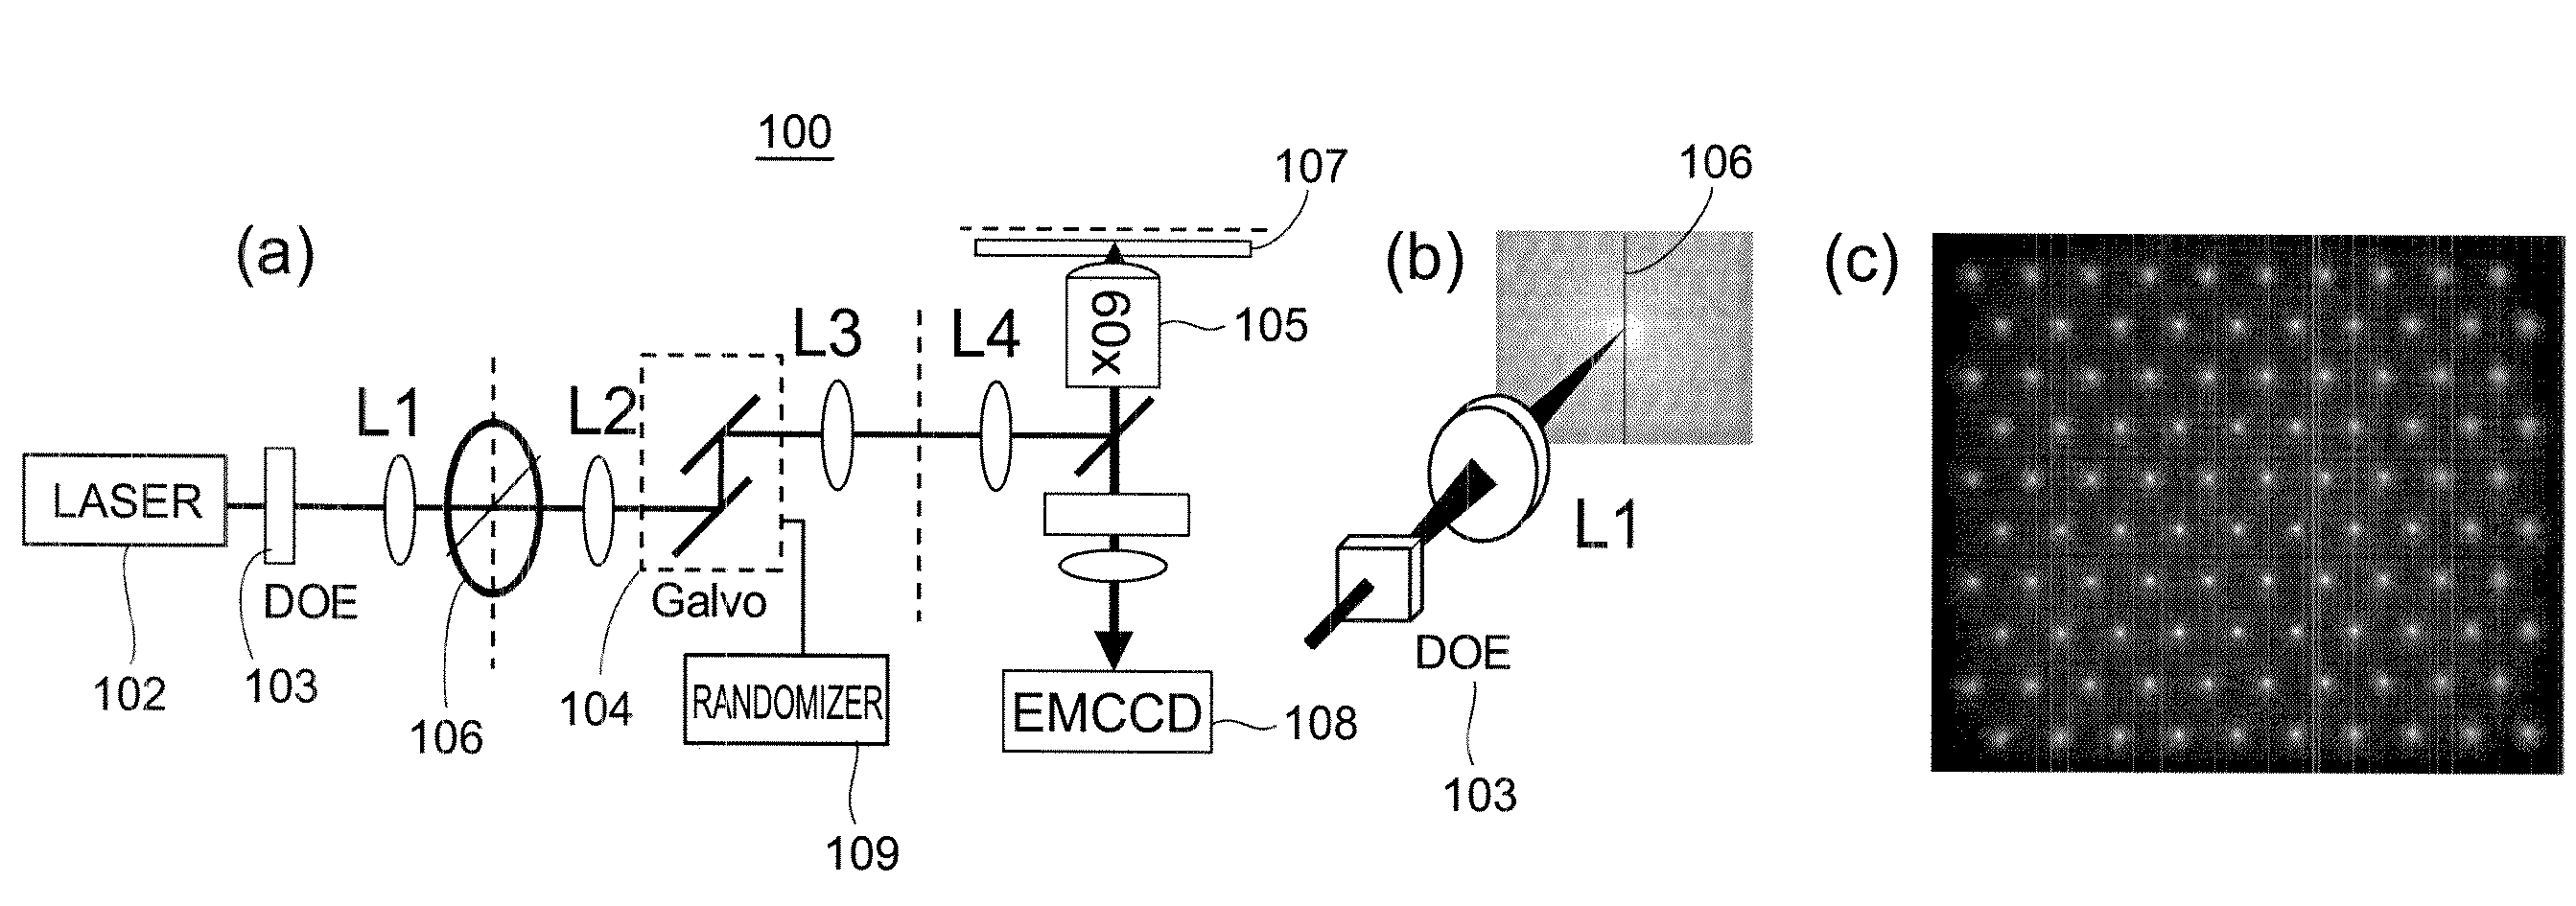 Stochastic Scanning Apparatus Using Multiphoton Multifocal Source